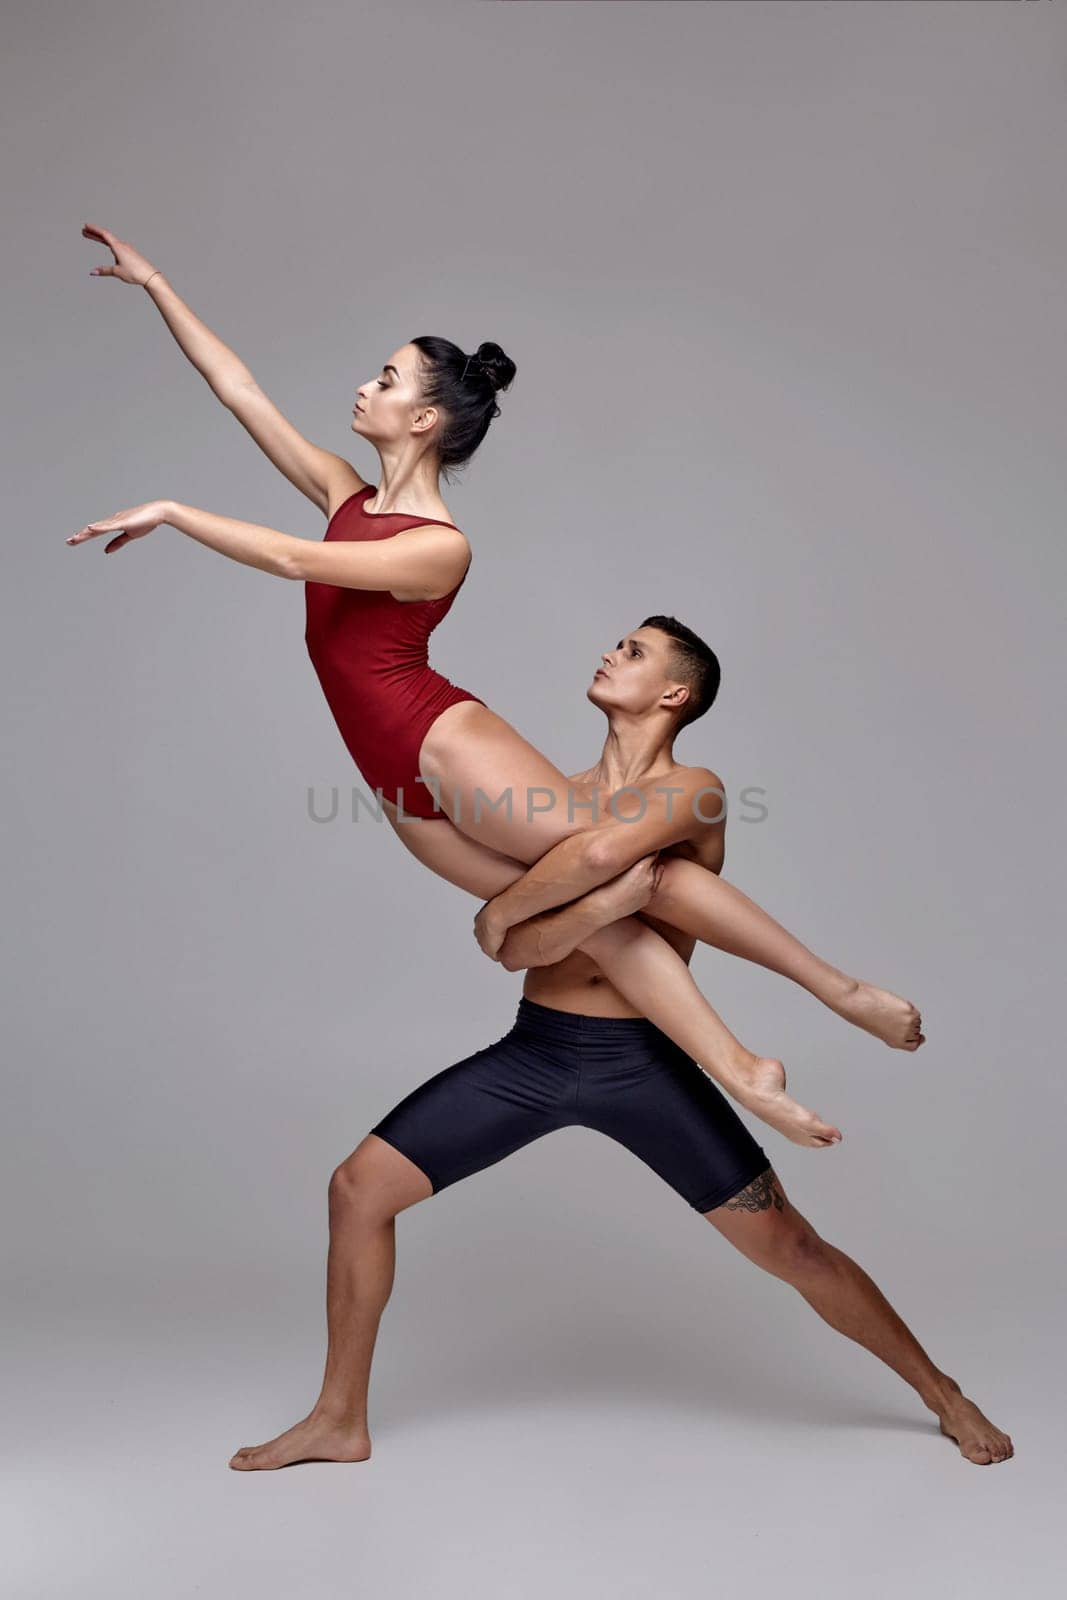 Two modern ballet dancers are posing against a gray studio background. Strong guy in black shorts and tiny girl in a red swimwear are dancing together. Ballet and contemporary choreography concept. Art photo.